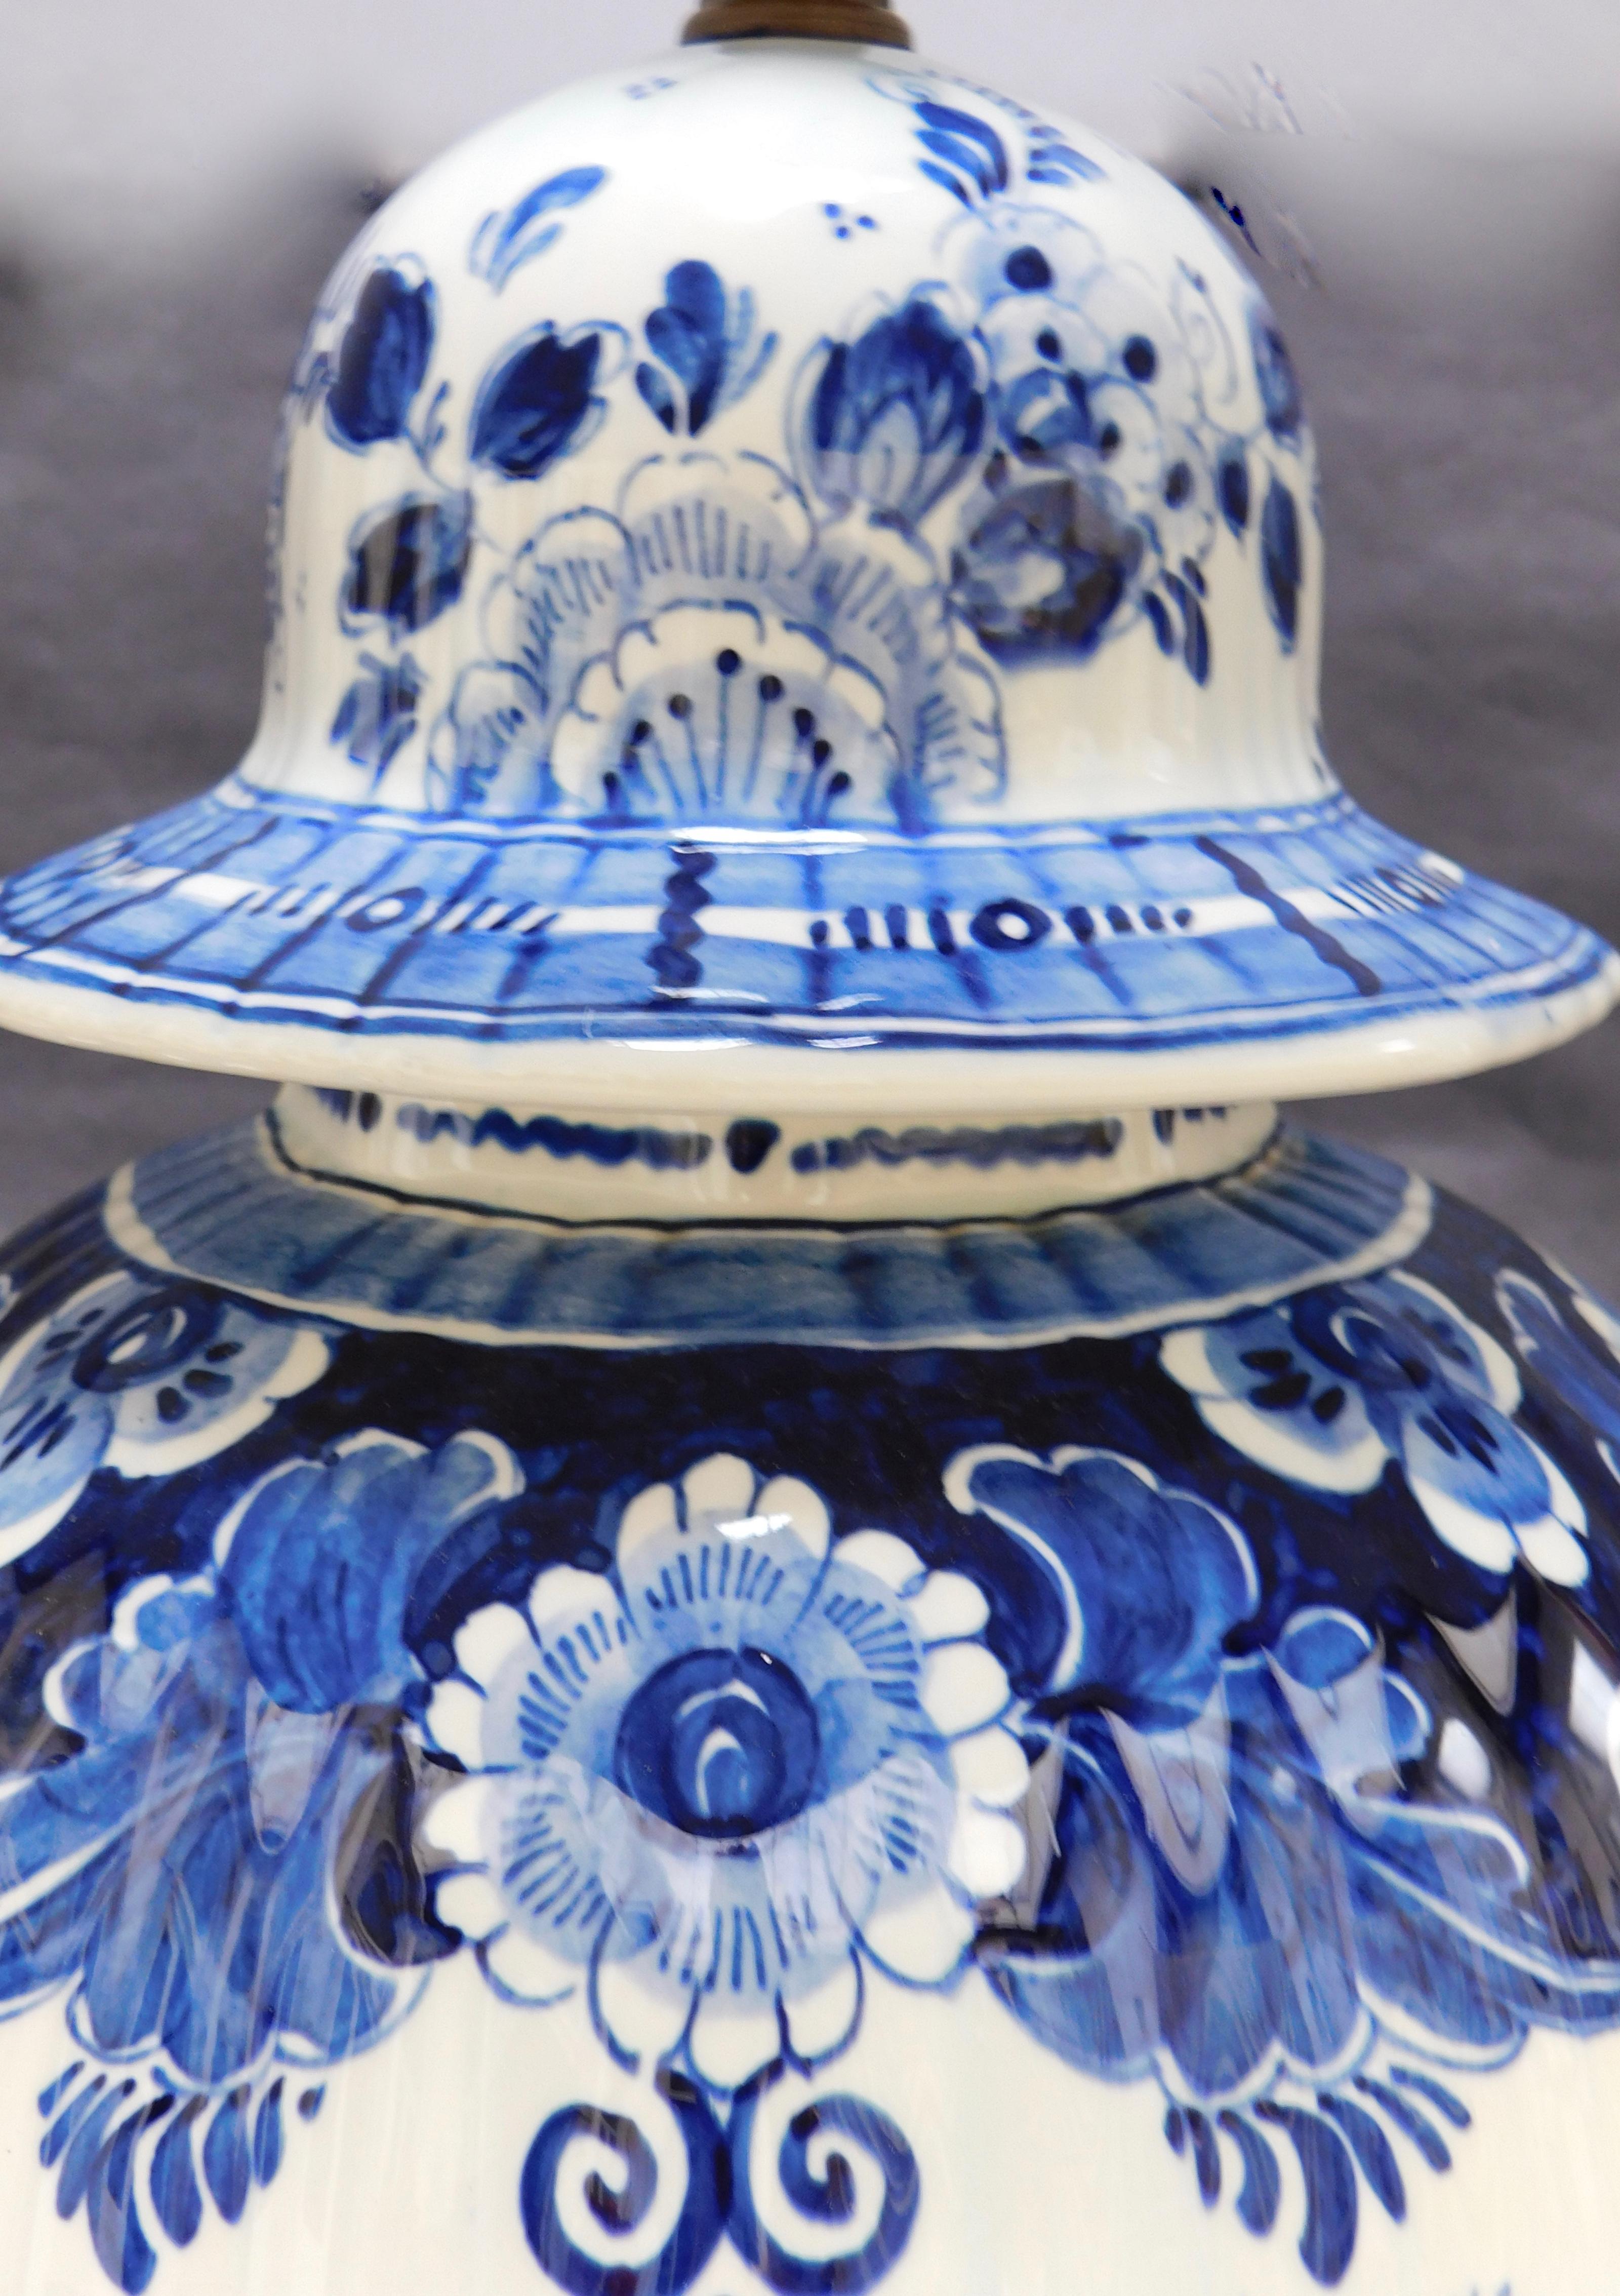 A vintage blue and white ceramic Delft urn hand-painted in Delft Holland. The pattern is classically Dutch from the 